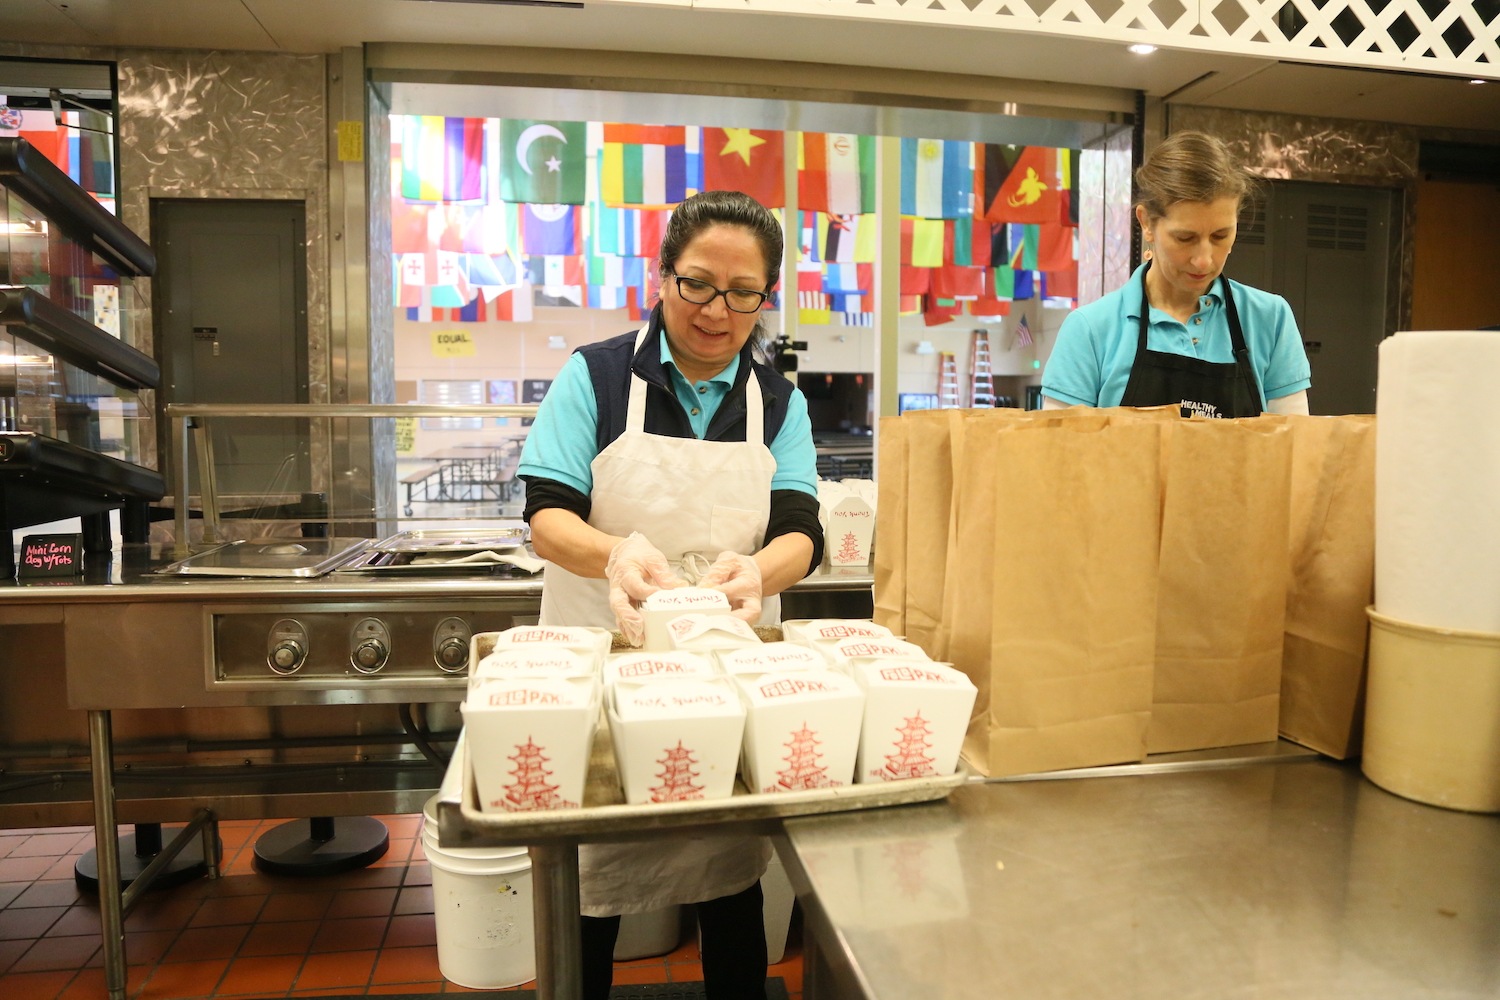 School nutritional officials prepare grab and go meals for Northshore students, who are learning remotely as in-person instruction is on hold due to coronavirus concerns.